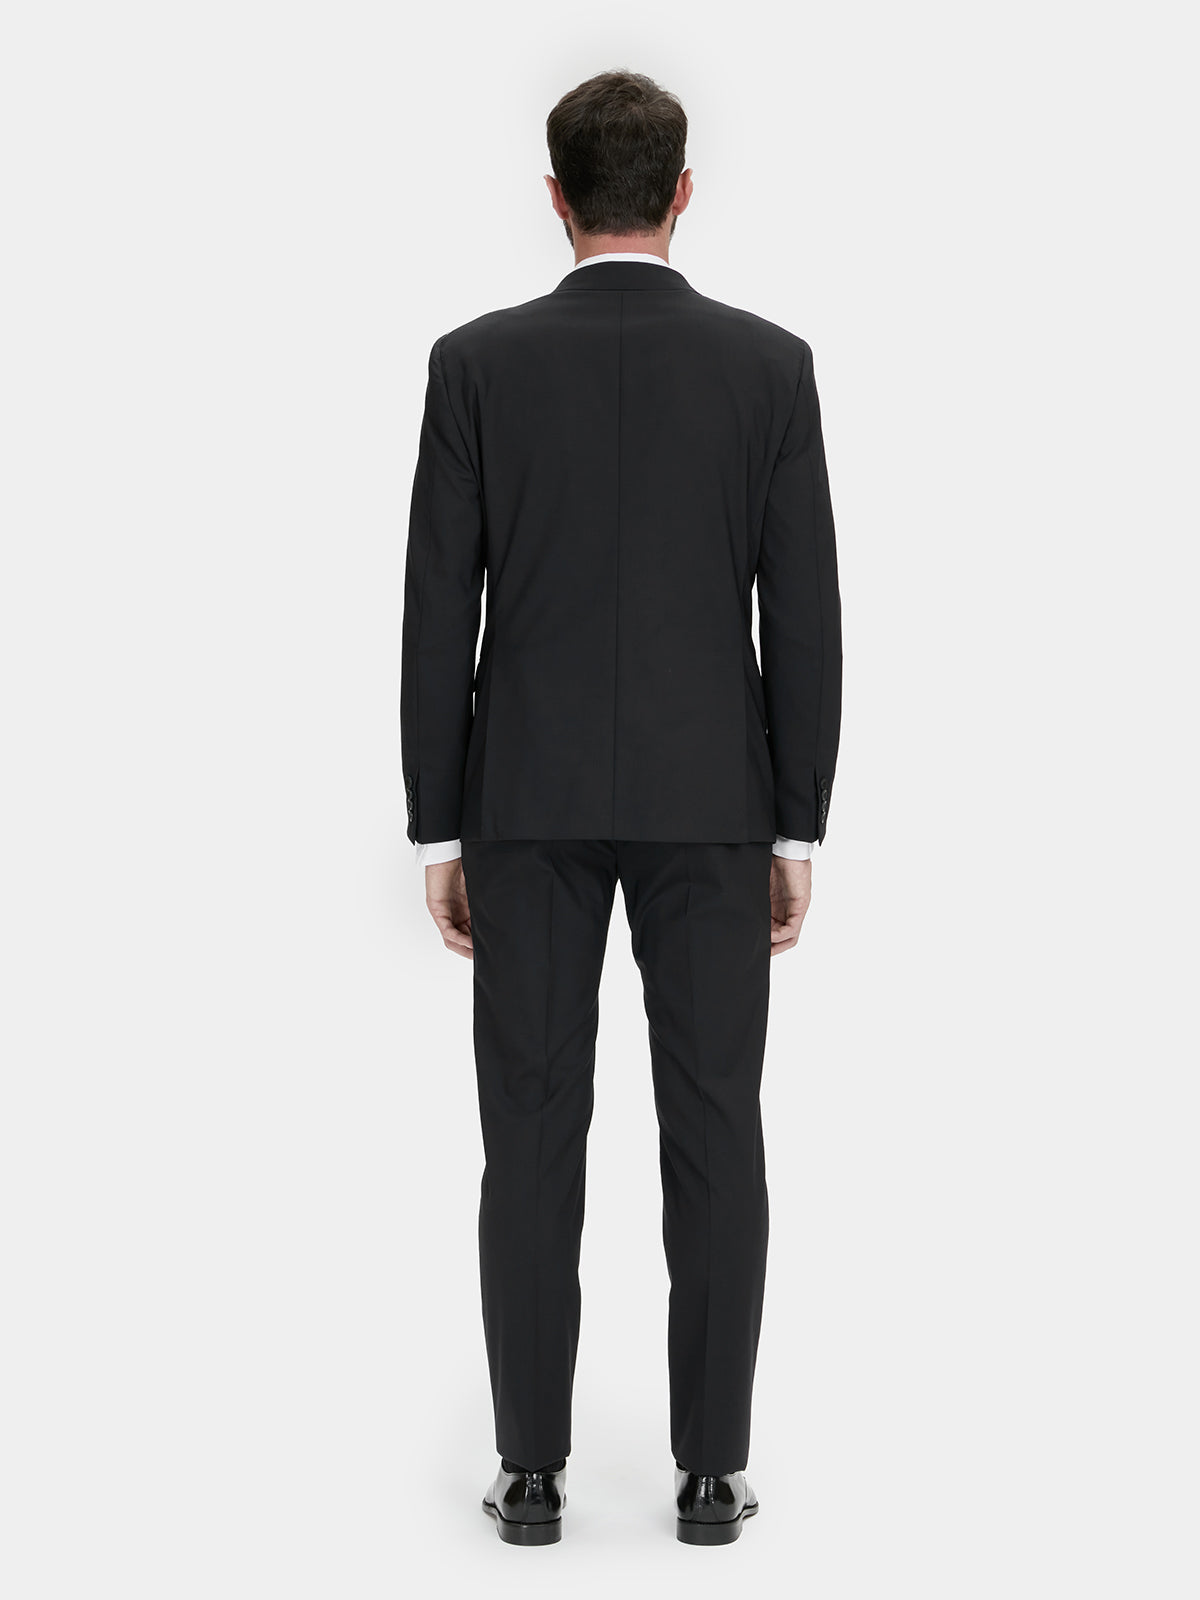 Iconic suit in black cool wool Drop 8